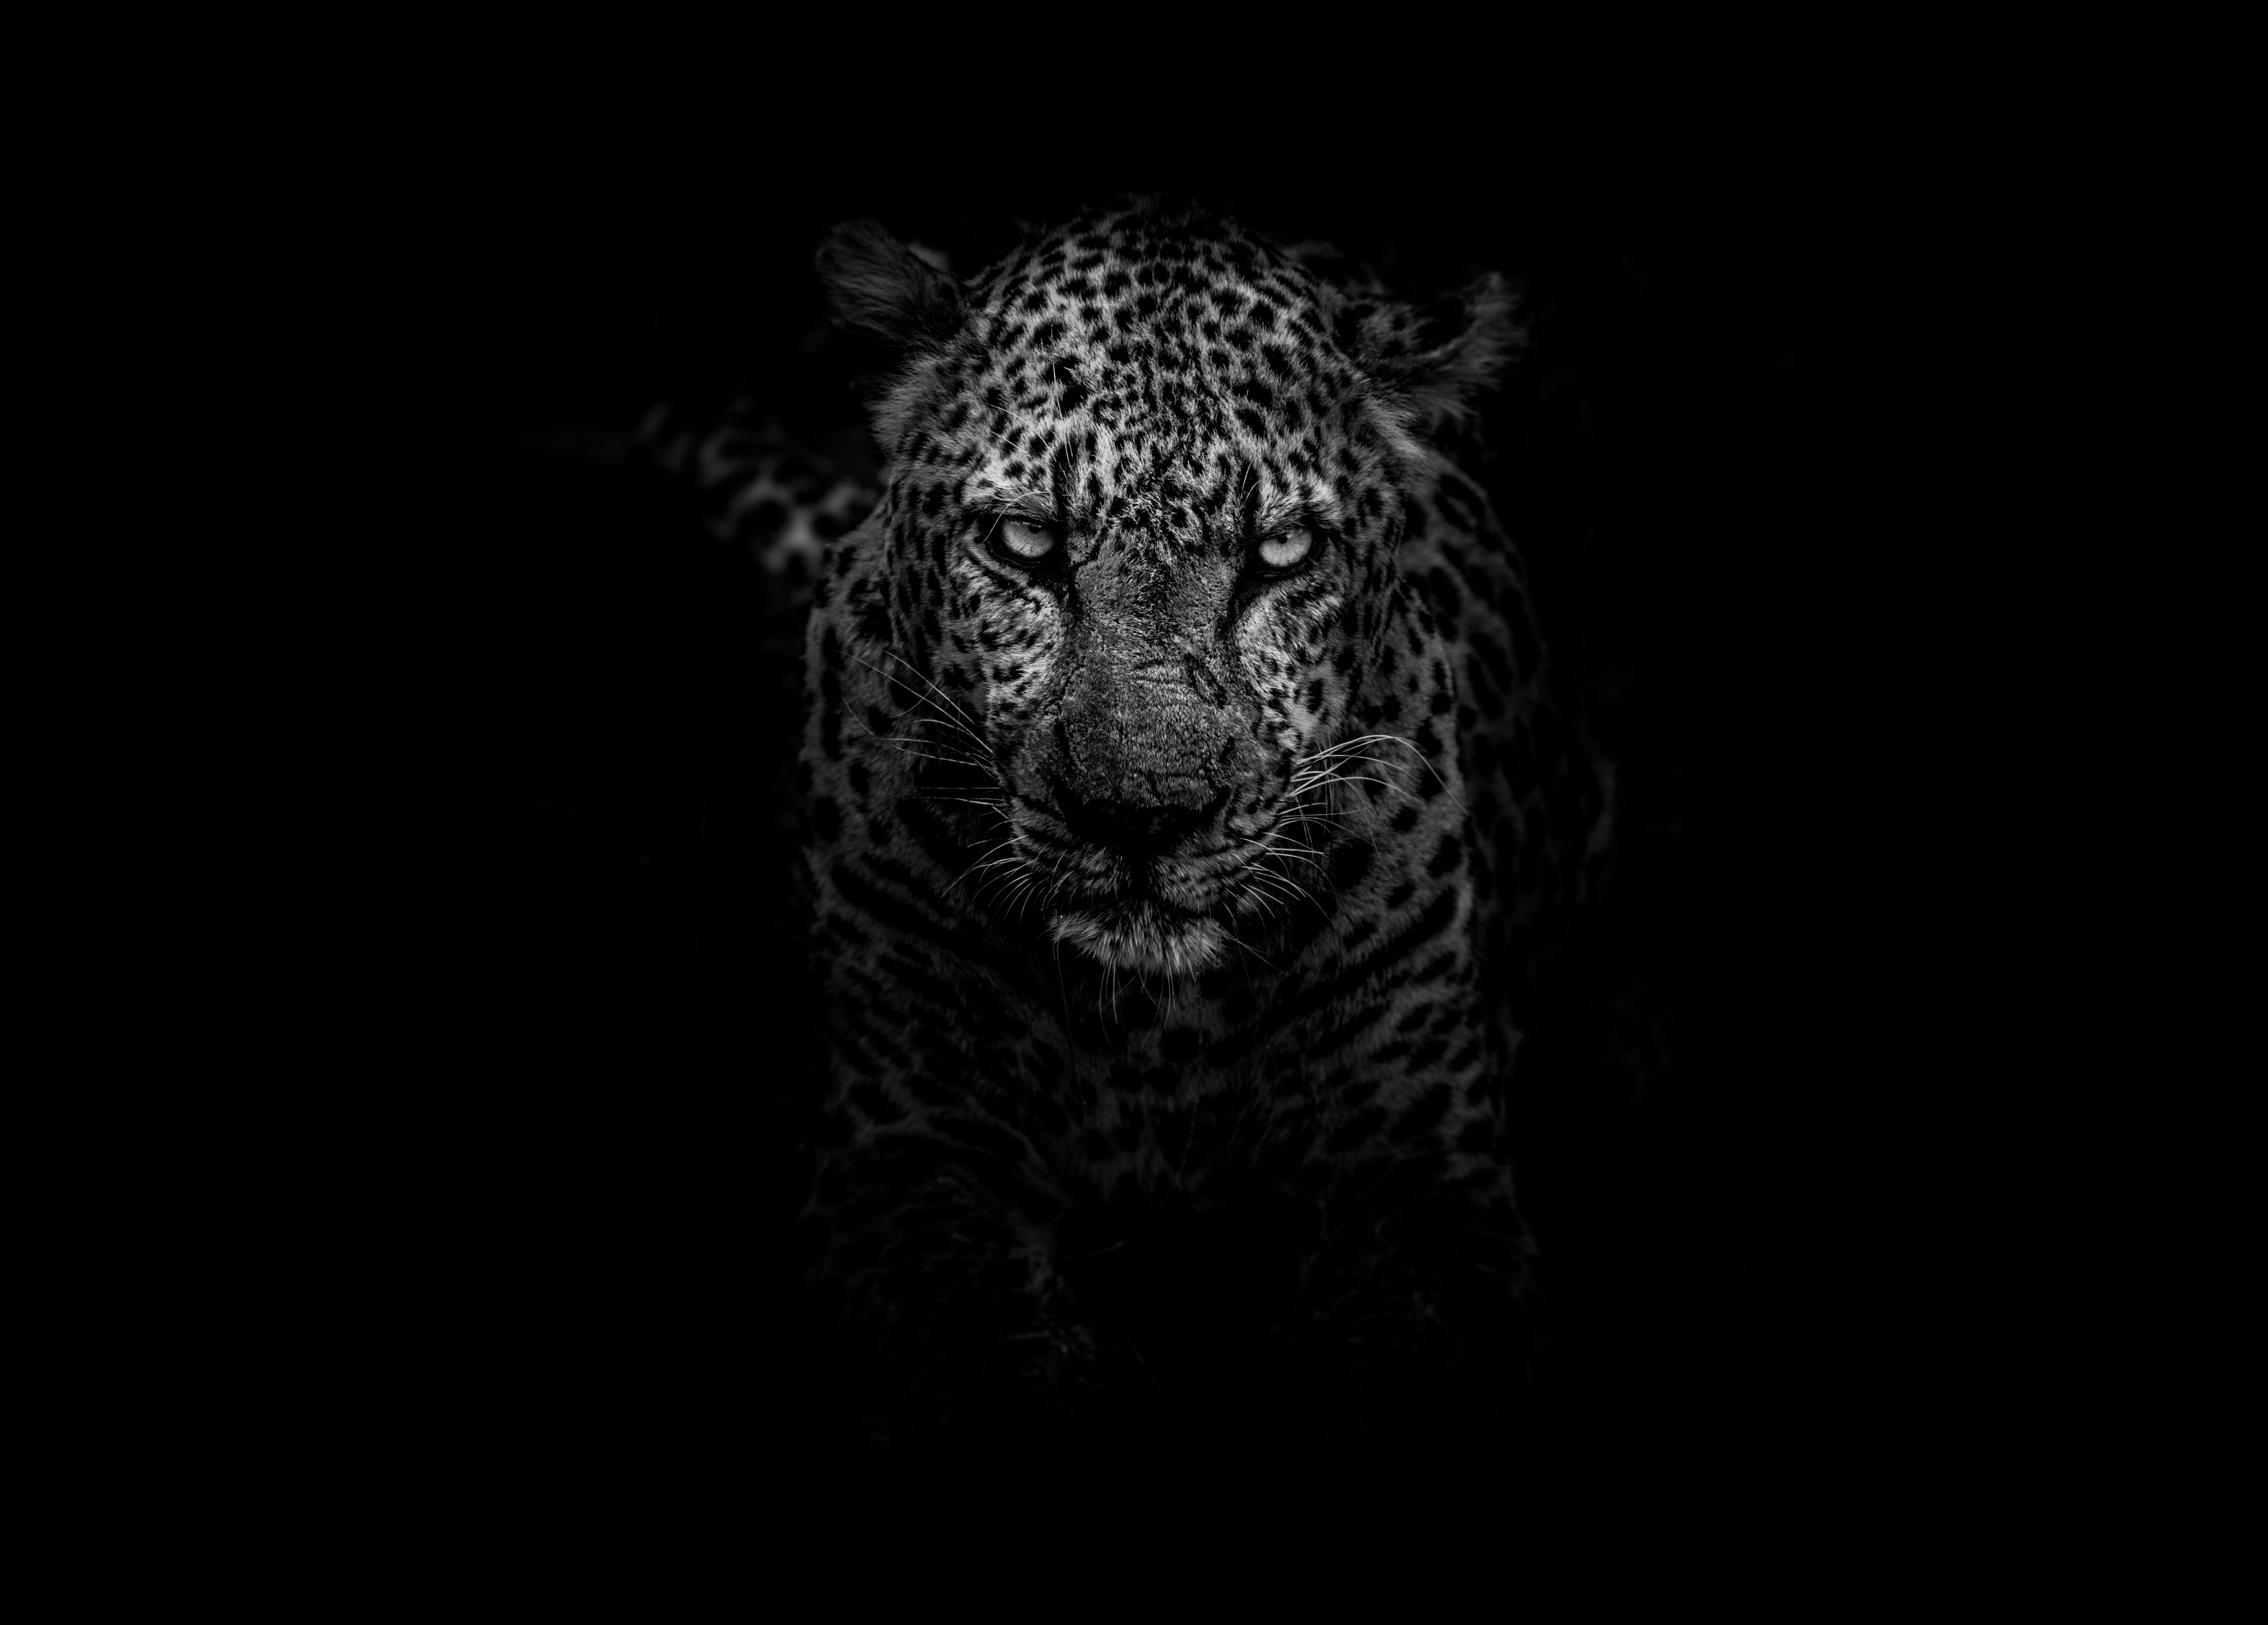 Leopard Monochrome Animals Kruger National Park Looking At Viewer 5498x3940